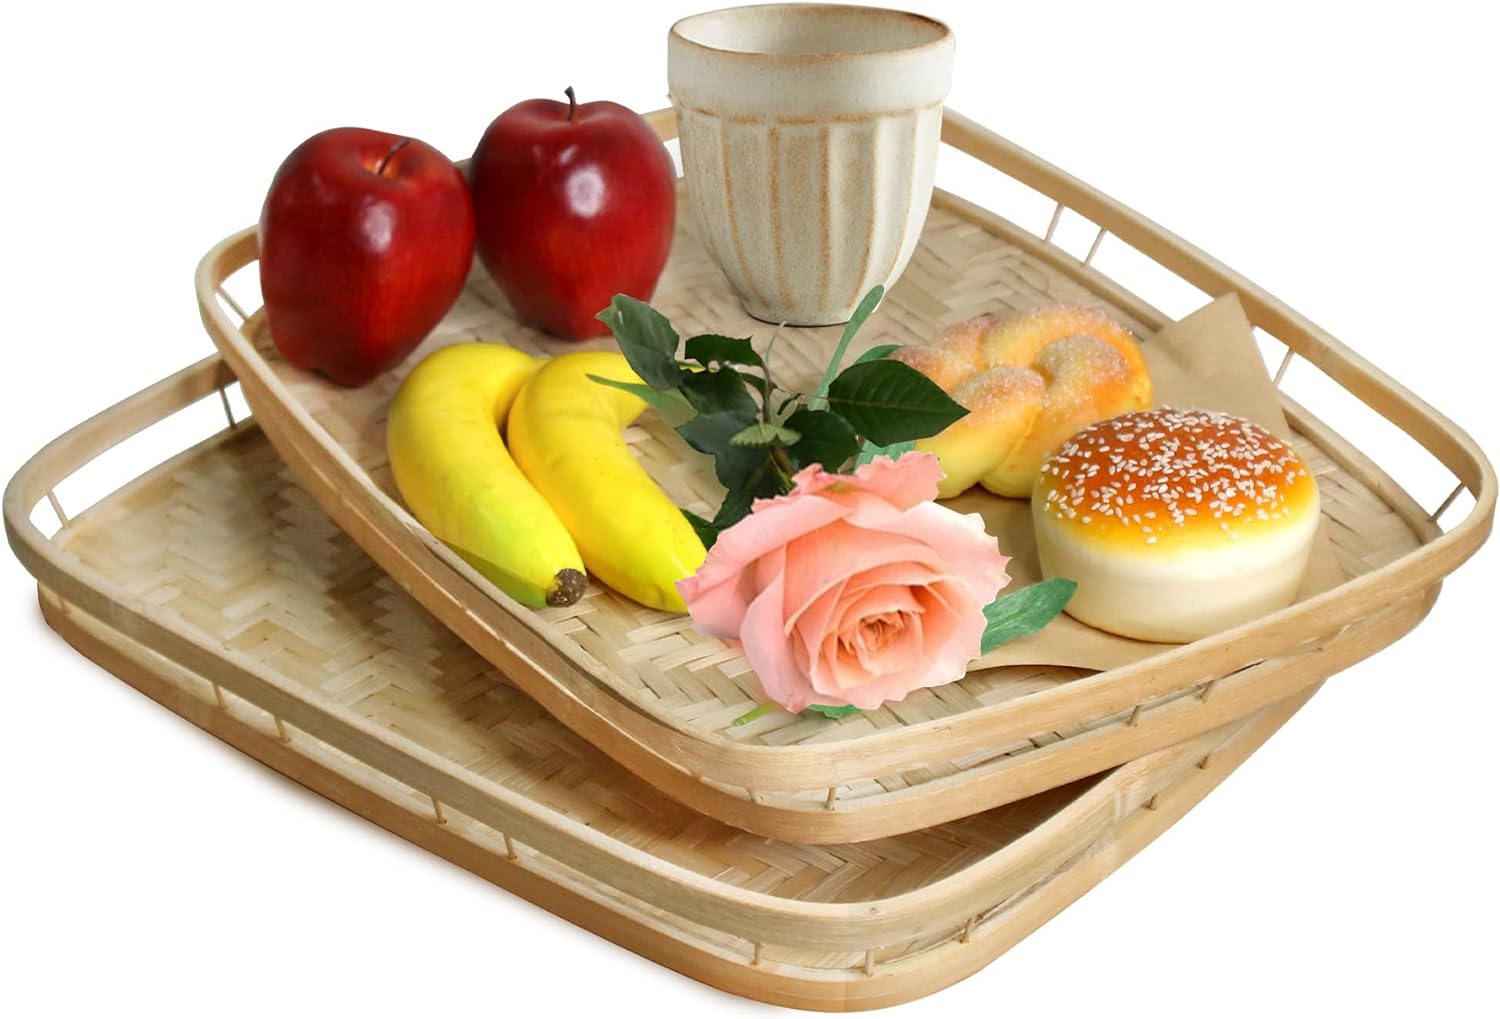  Sgigiul Bamboo Dinner Food Trays For Eating On